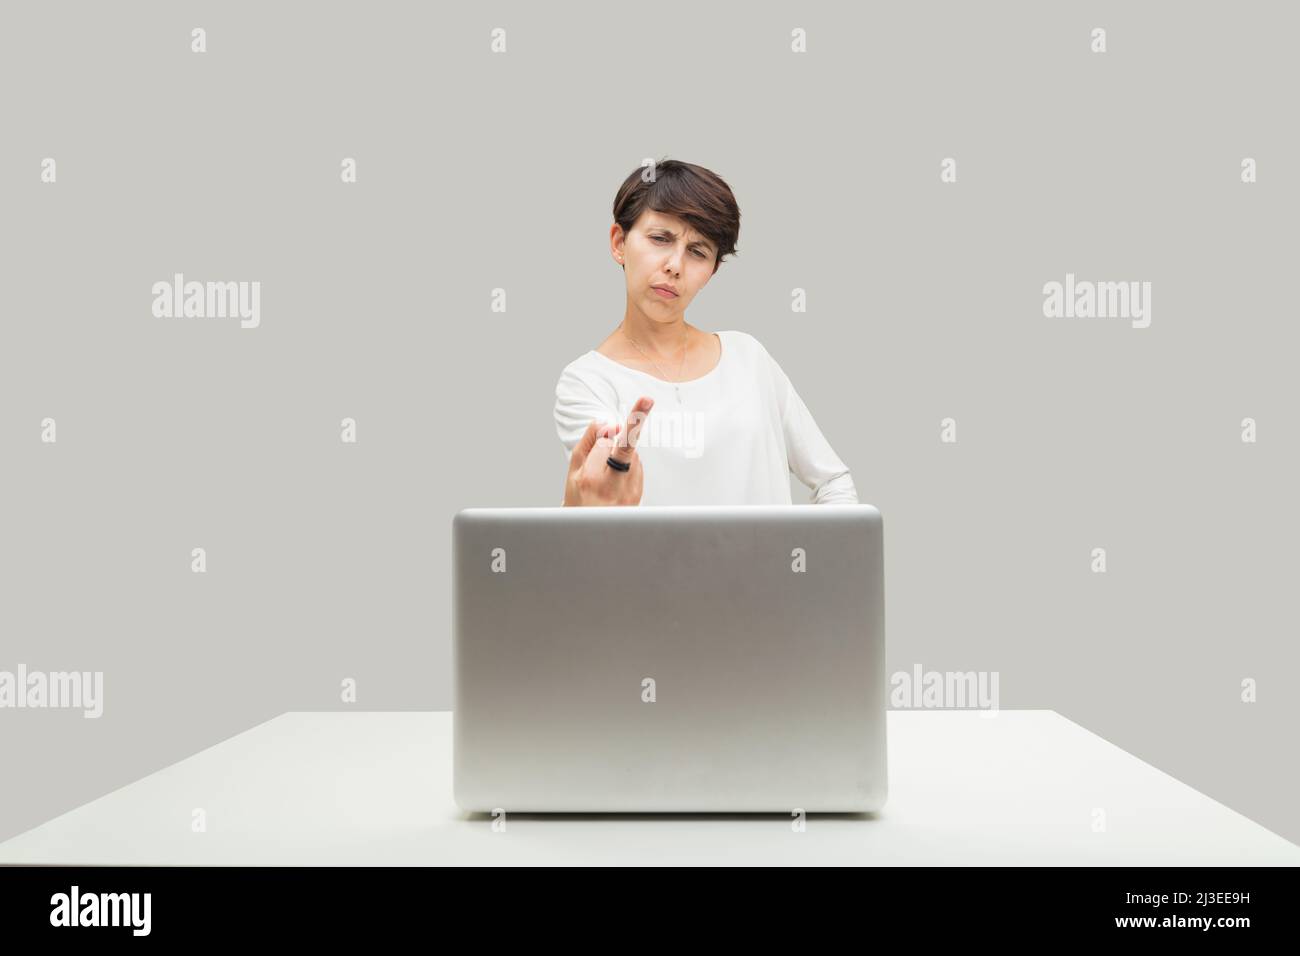 Angry ordinary young woman gestures toward her laptop screen, erects middle finger toward what she disagrees with: injustice, evil Stock Photo